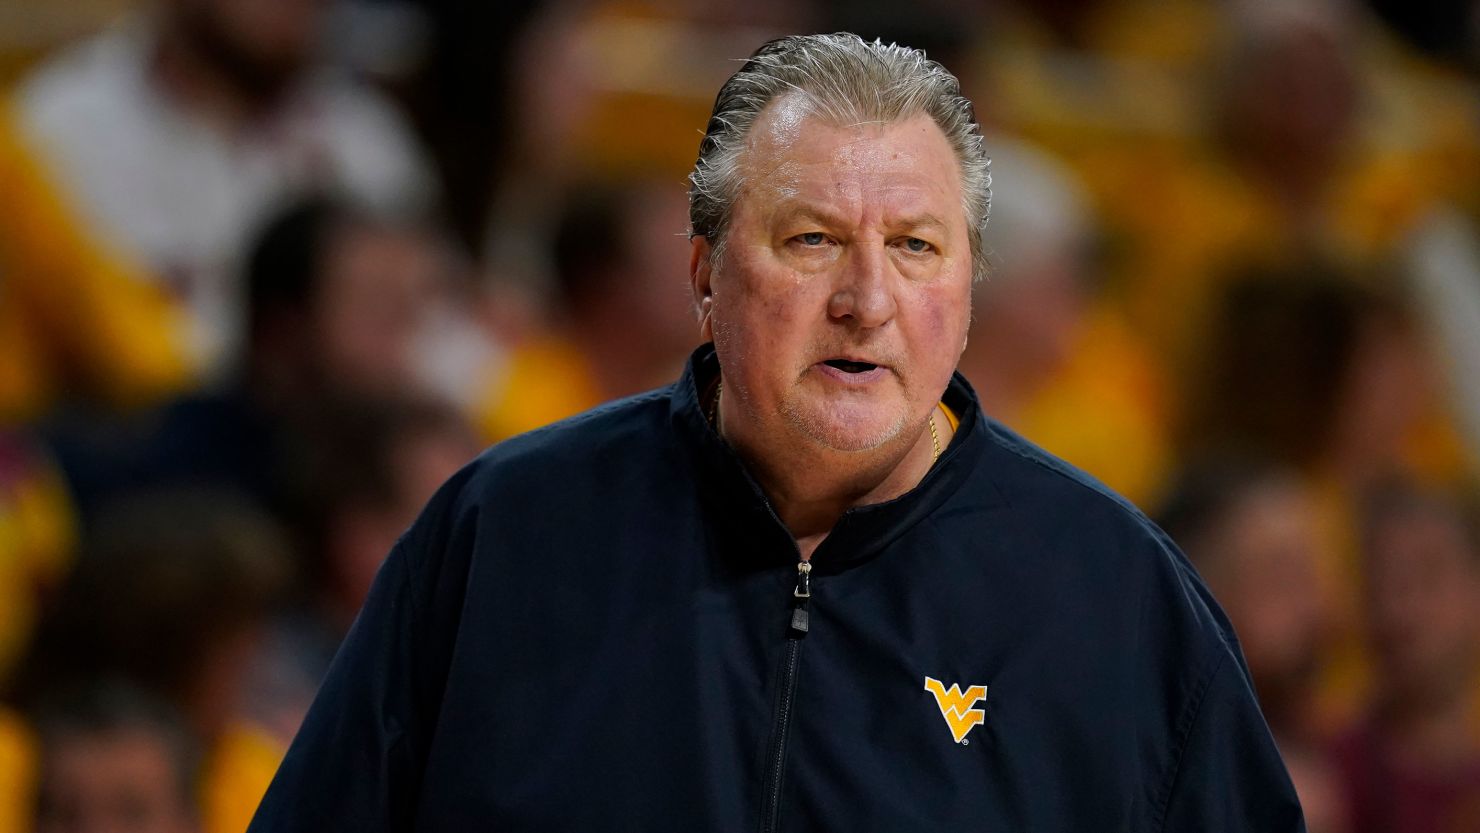 FILE - West Virginia head coach Bob Huggins watches from the bench during the first half of an NCAA college basketball game against Iowa State, Monday, Feb. 27, 2023, in Ames, Iowa.  Huggins has been arrested on suspicion of drunken driving, Friday, June 16, a month after the university suspended him for three games for using an anti-gay slur while also denigrating Catholics during a radio interview. (AP Photo/Charlie Neibergall, File)